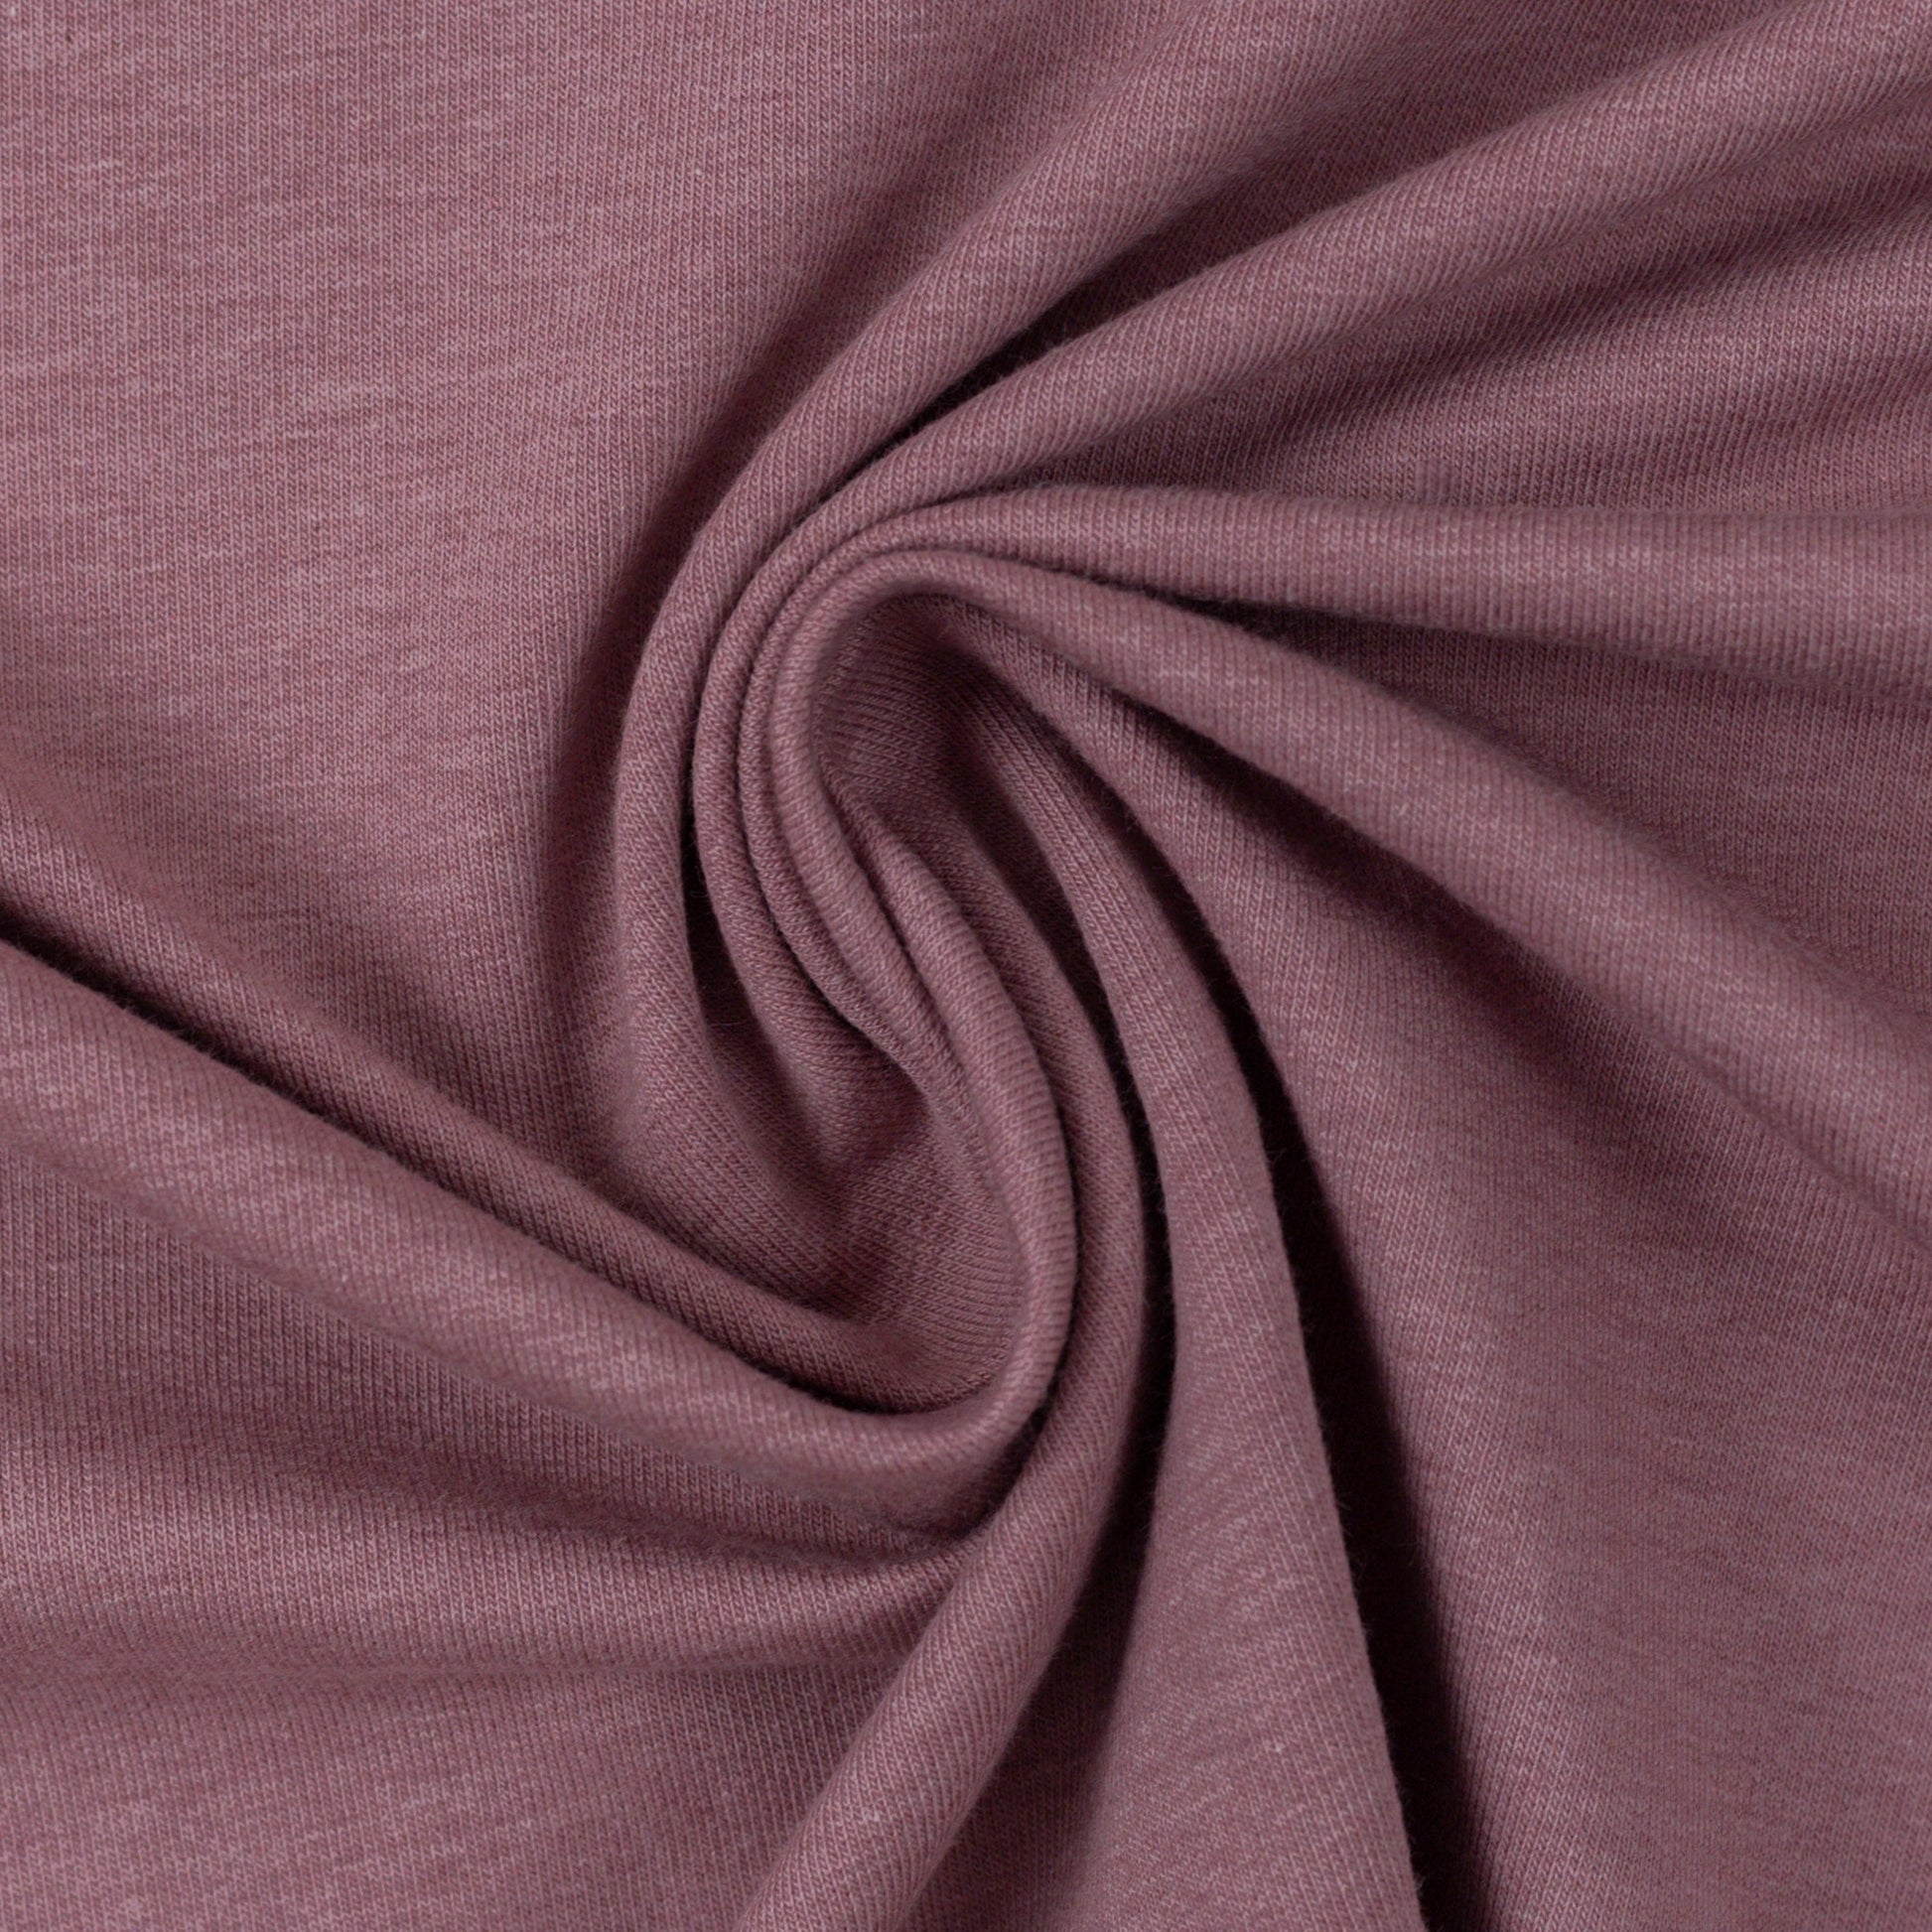 Swafing - Melange - Dark Old Pink - Euro-ribbing - Jersey - French Terry - Fleeced French Terry - 1436 - Little Rhody Sewing Co.